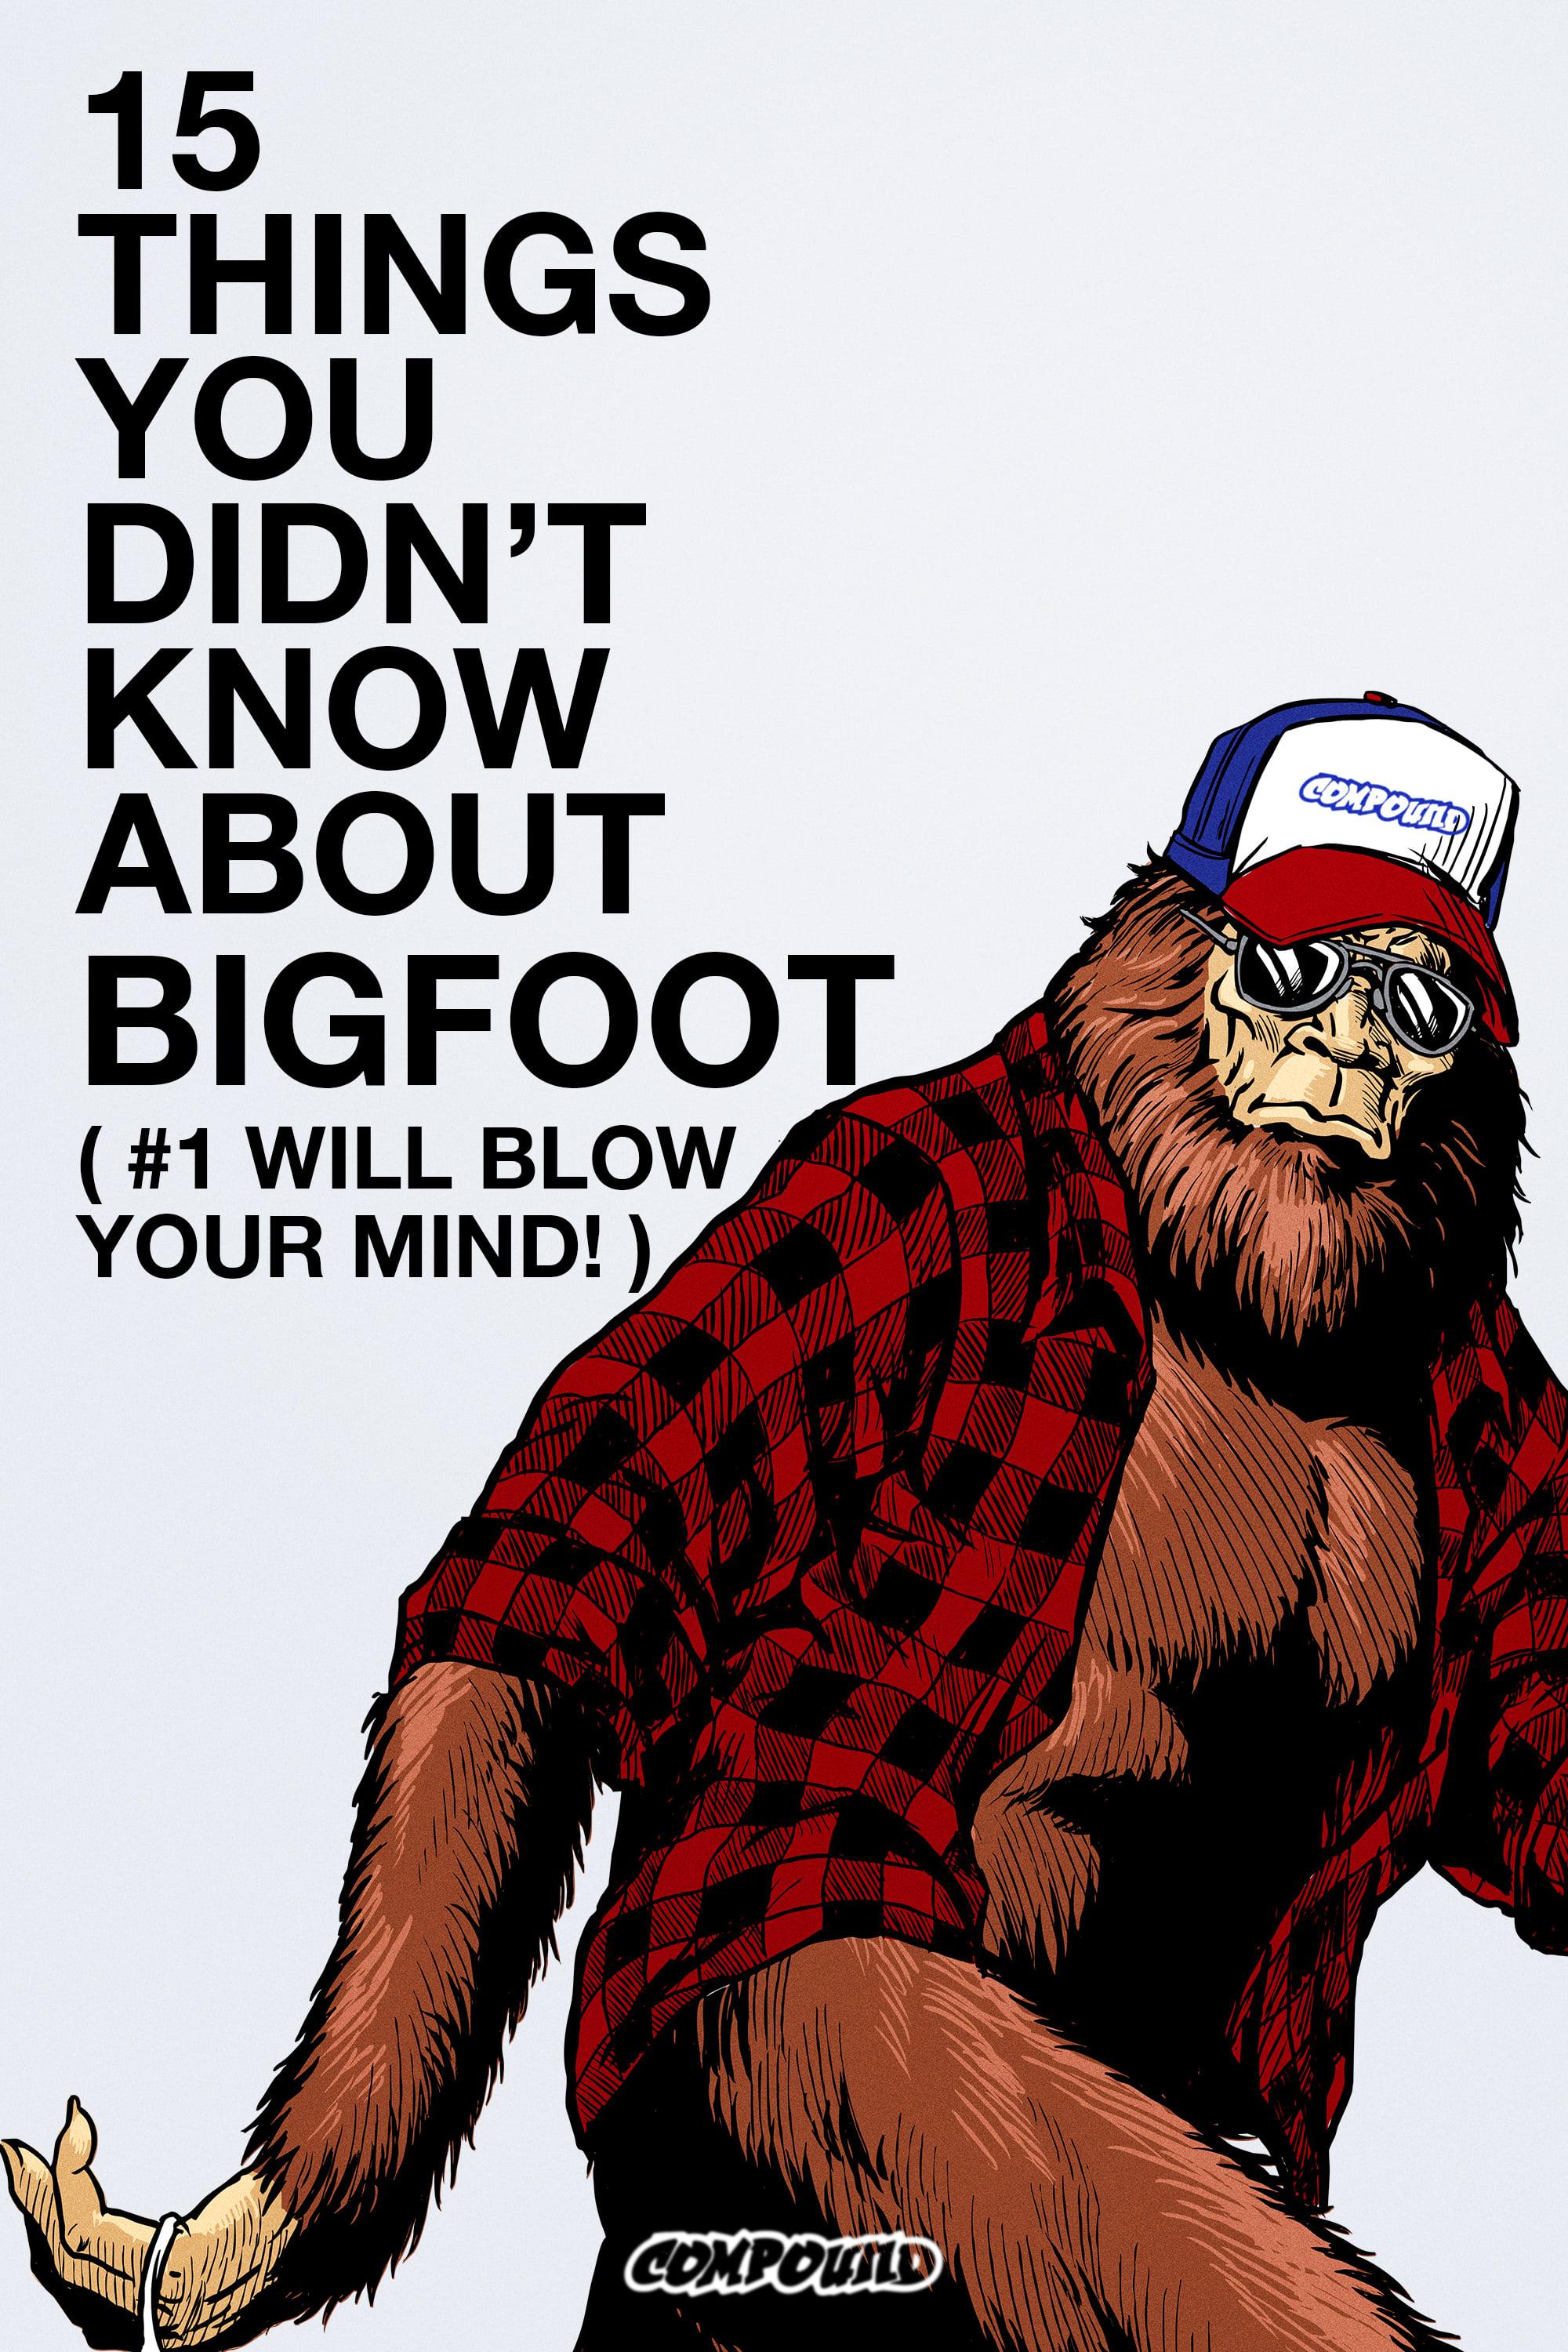 15 Things You Didn't Know About Bigfoot poster